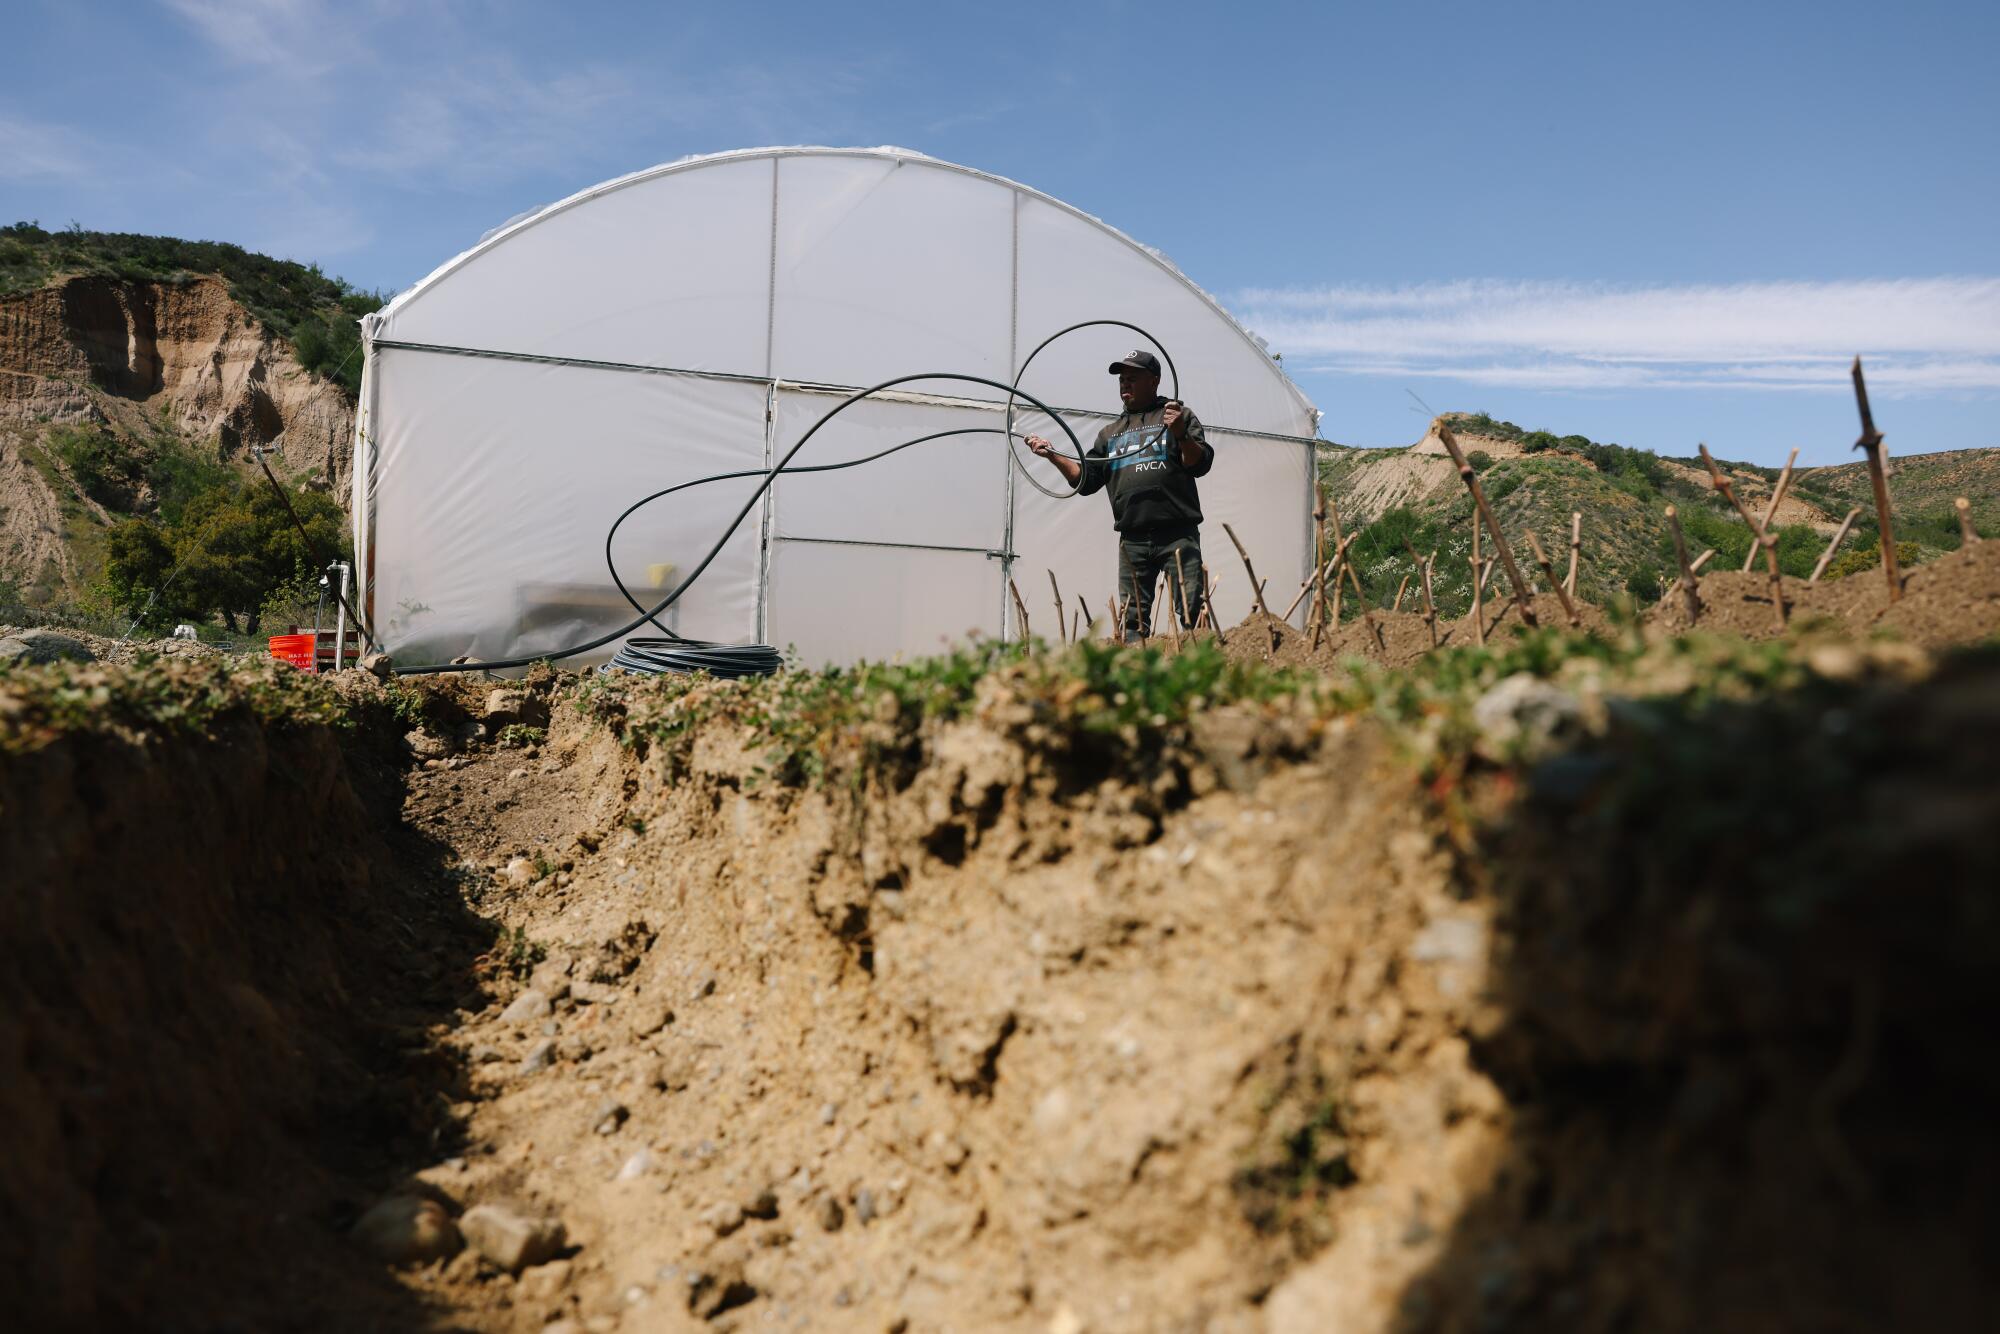 A man works outdoors next to a building and a large hole dug in the ground.